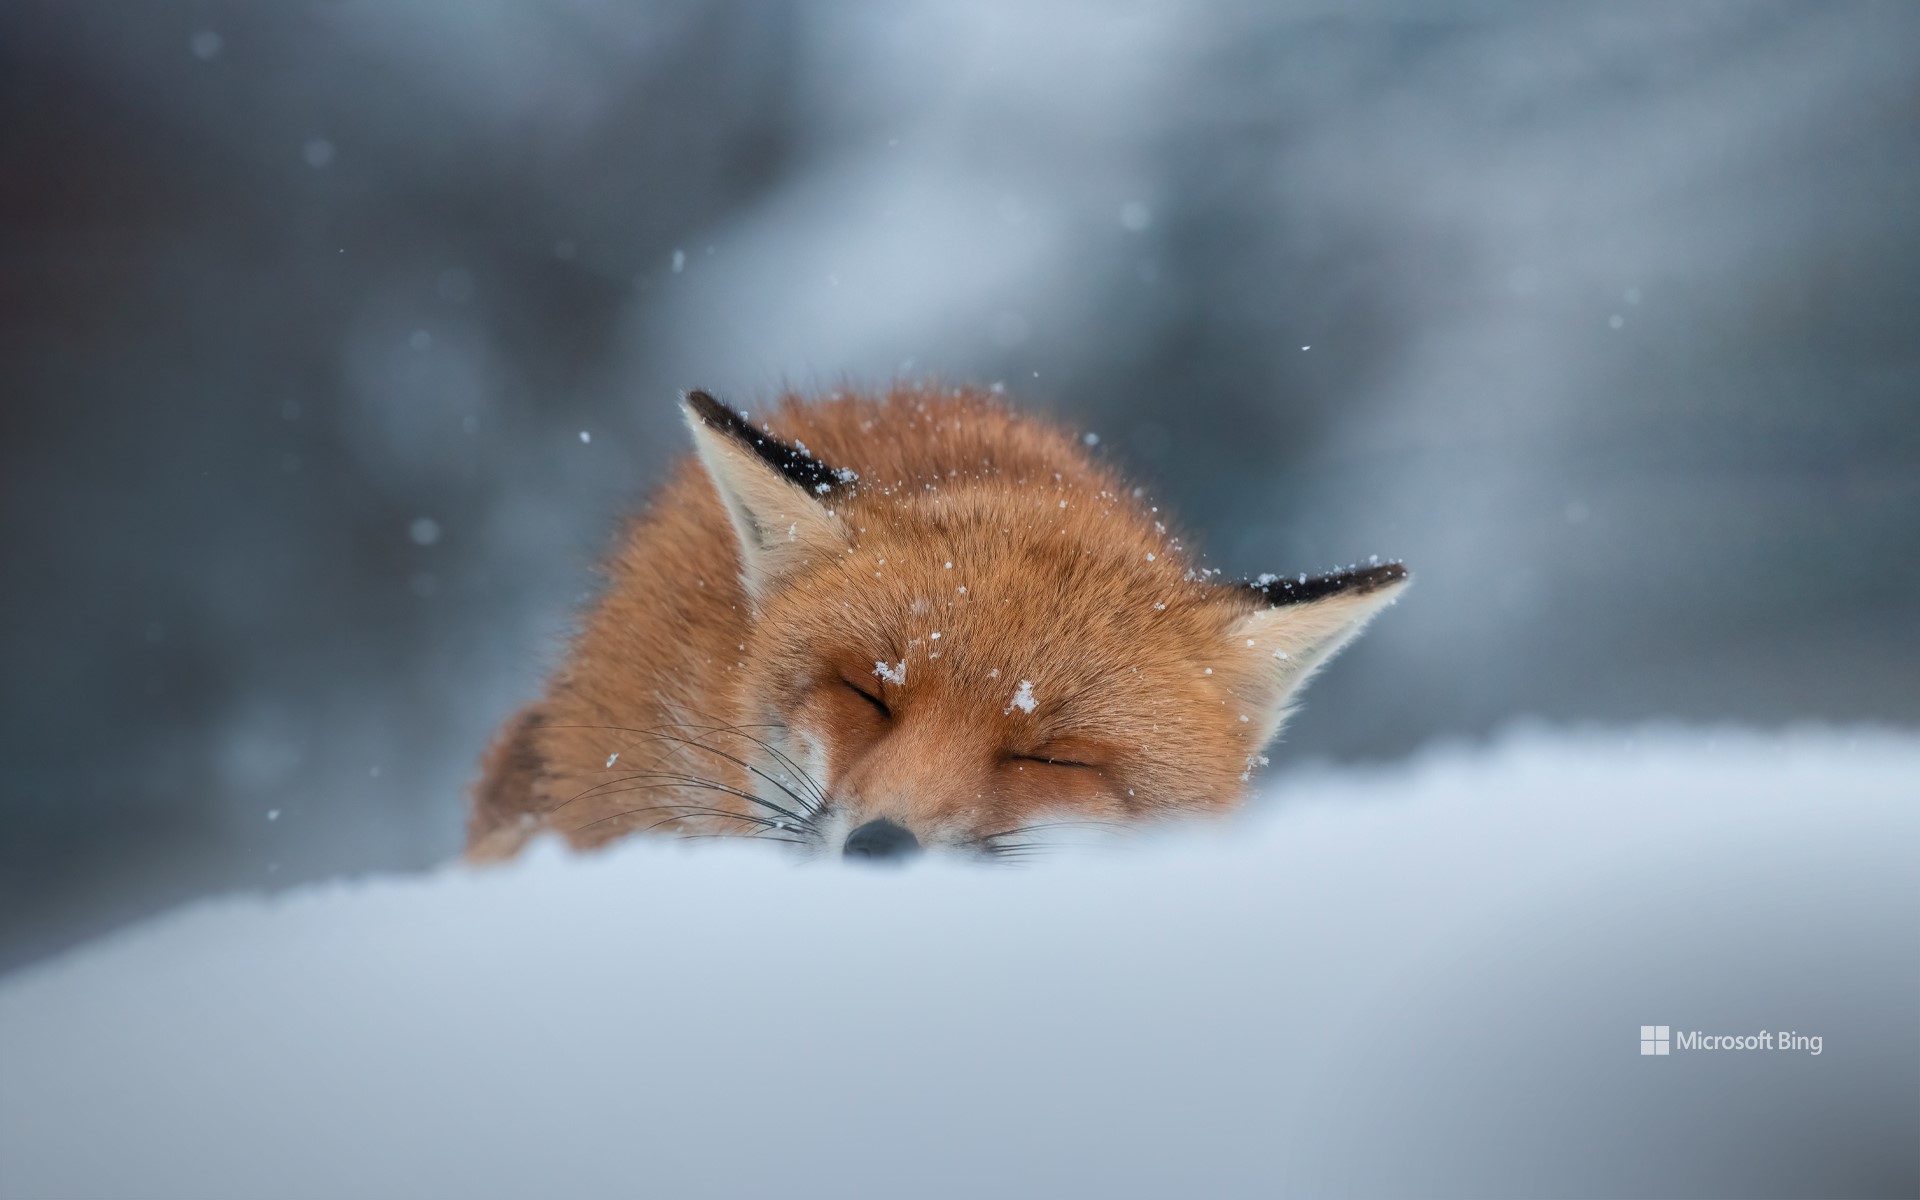 Red fox sleeping in the snow, Abruzzo, Italy